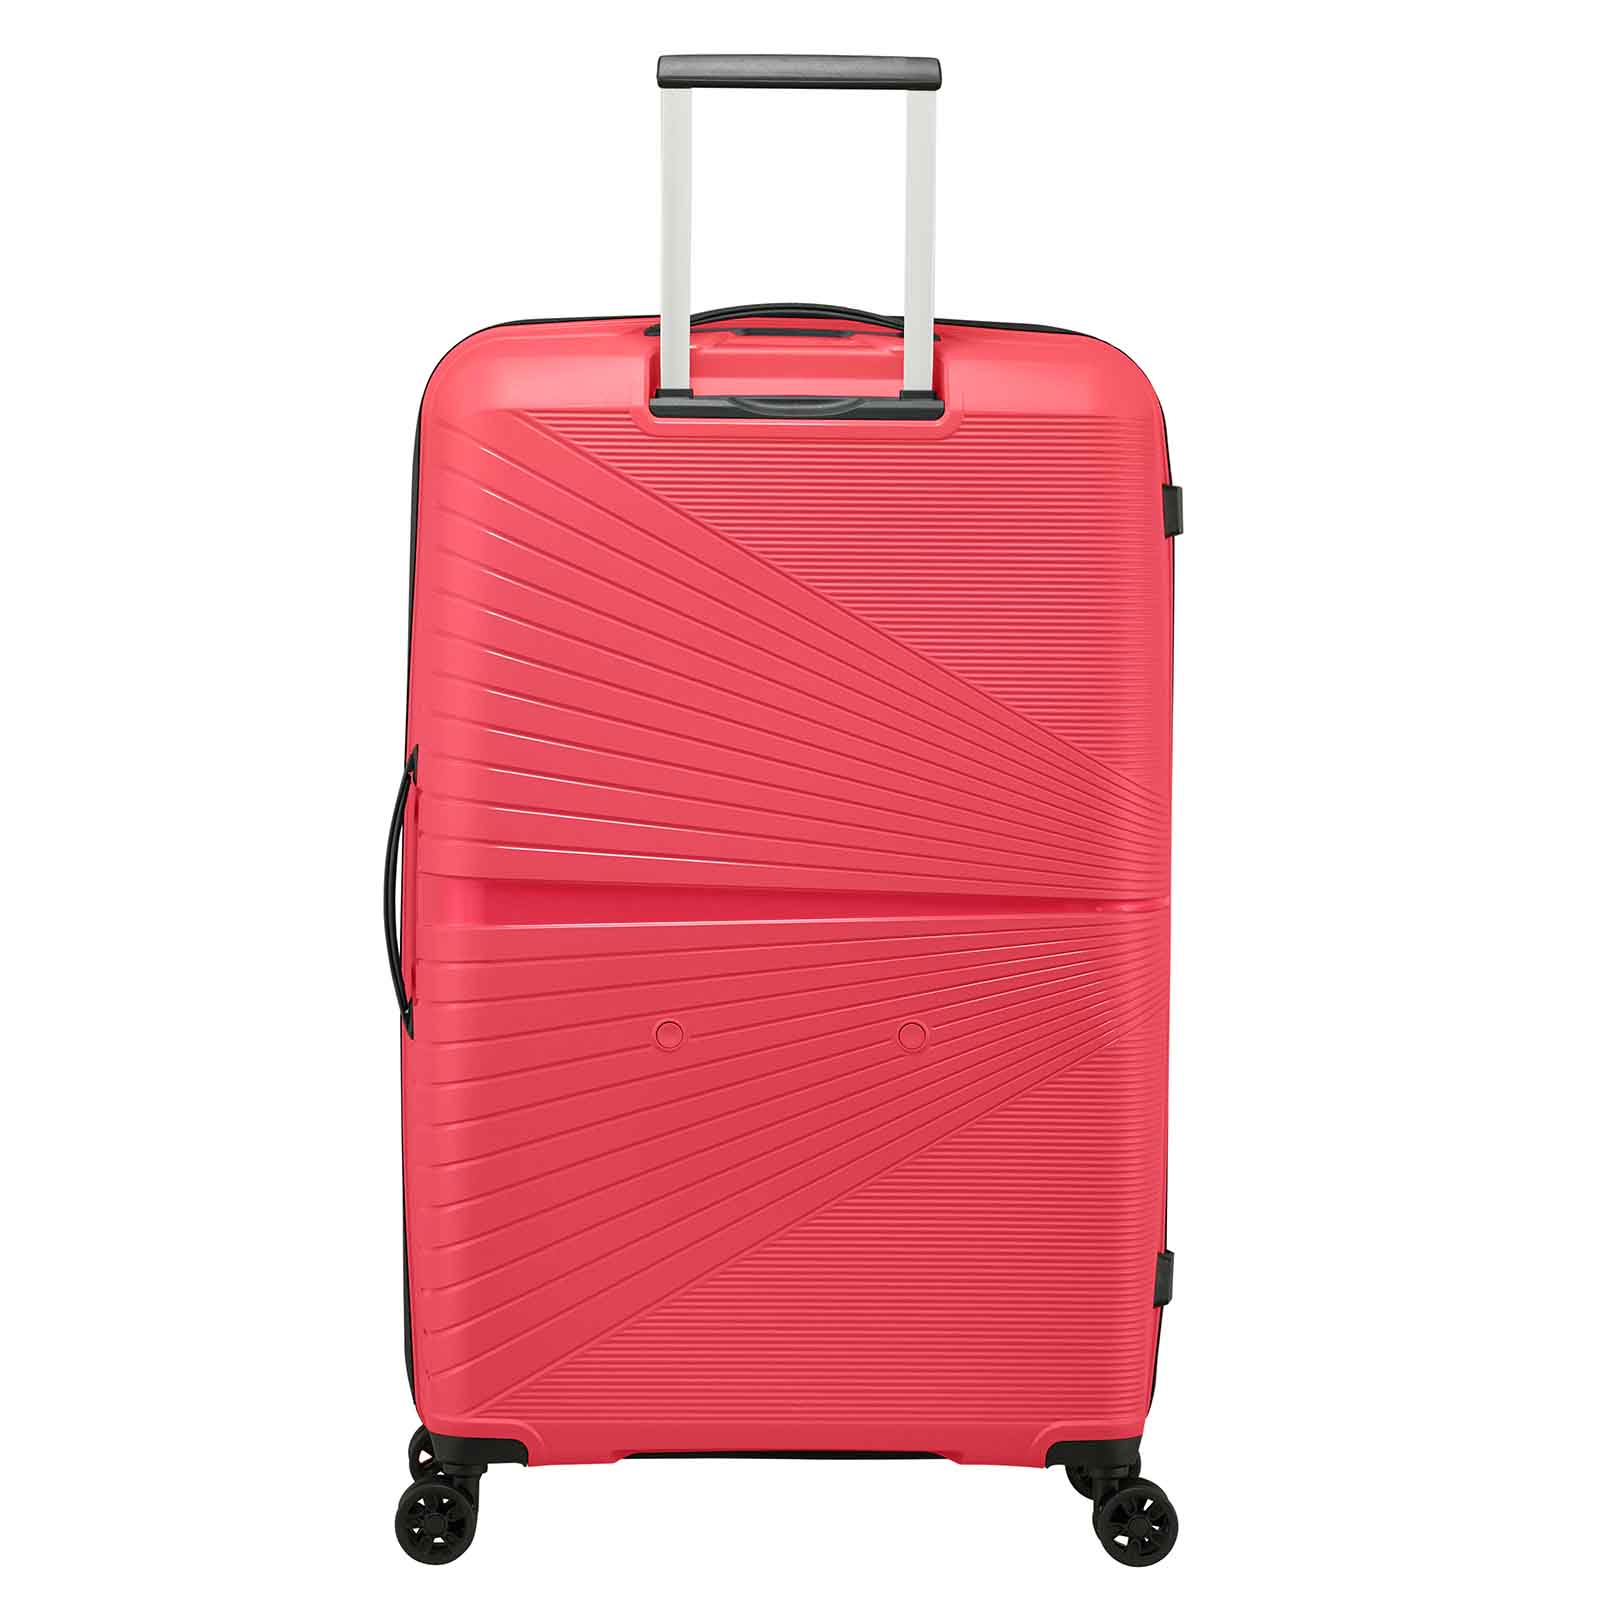 American-Tourister-Airconic-77cm-Suitcase-Paradise-Pink-Back